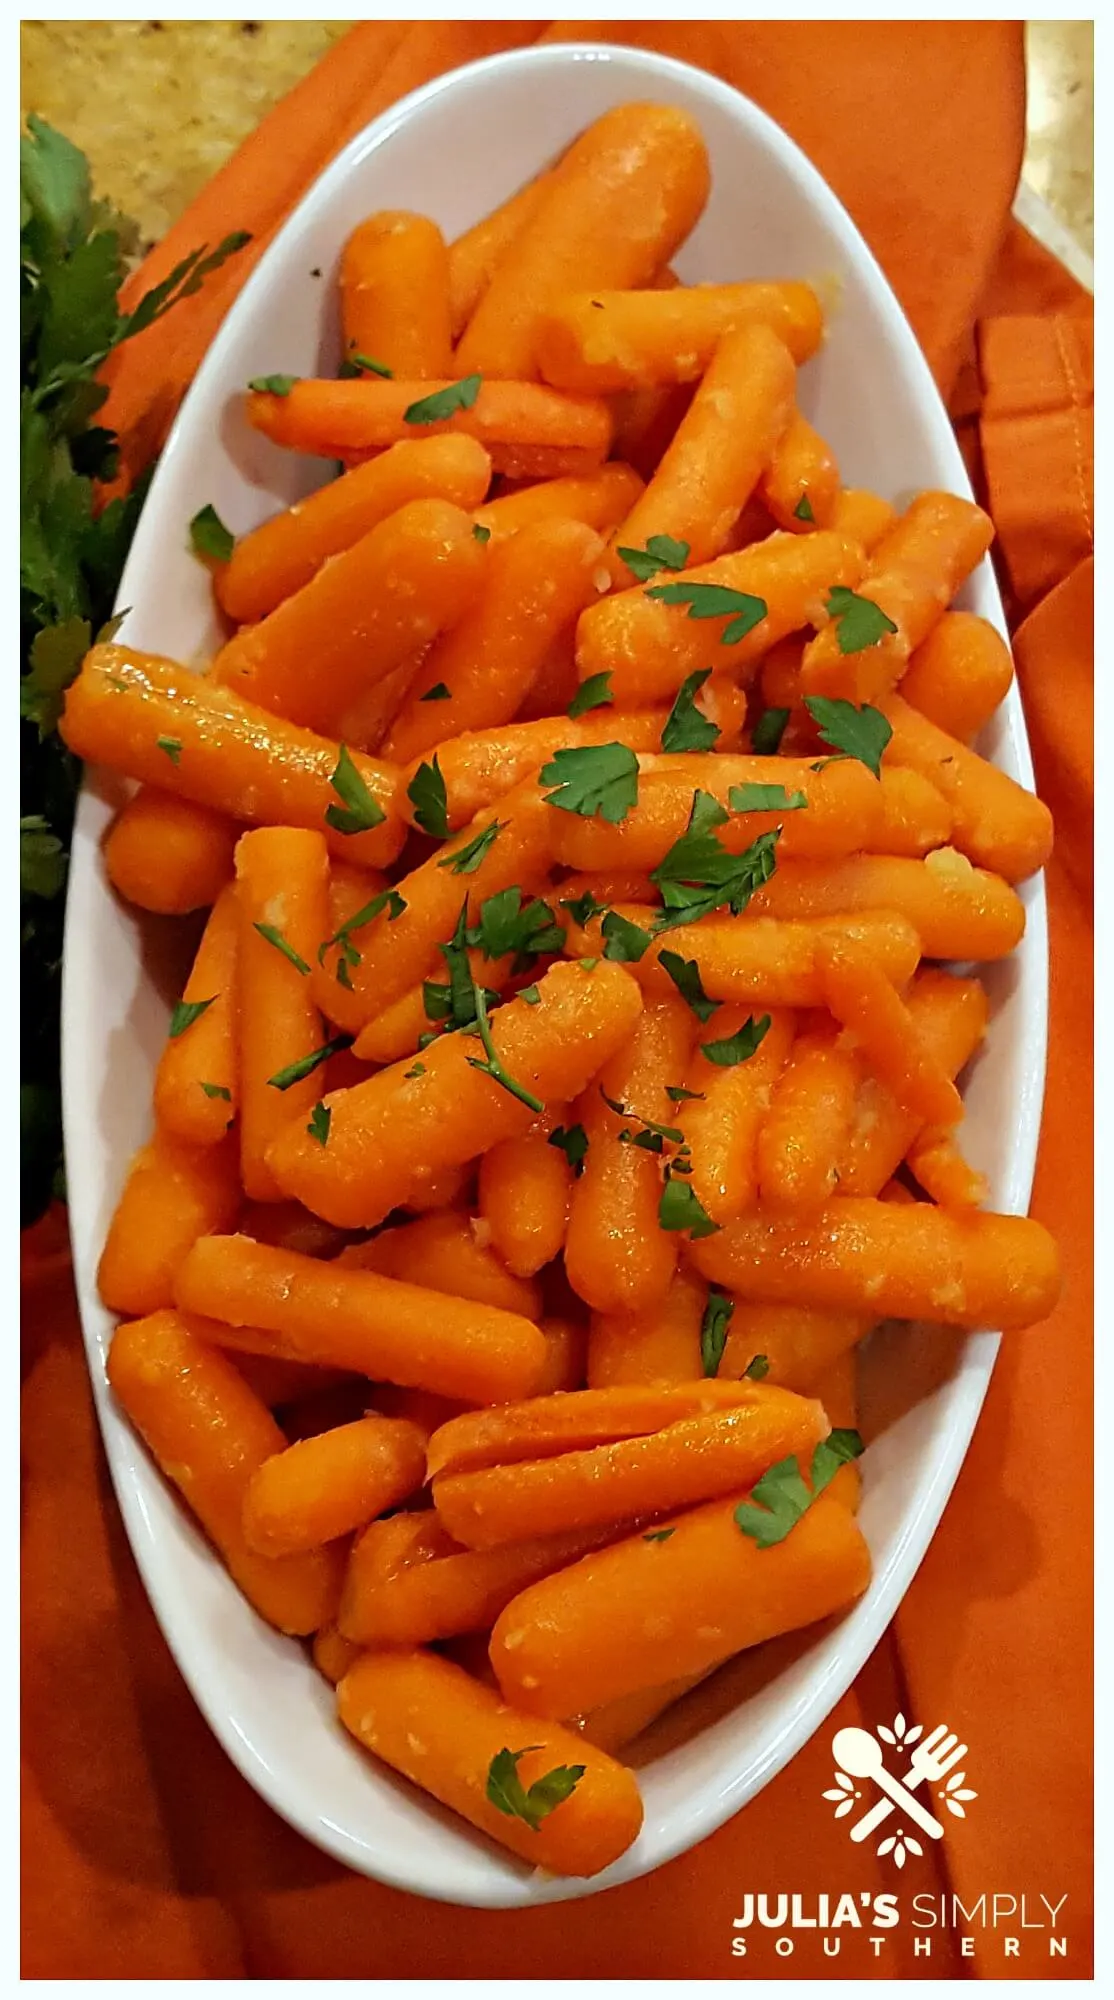 Glazed baby Carrot Recipe that is healthy